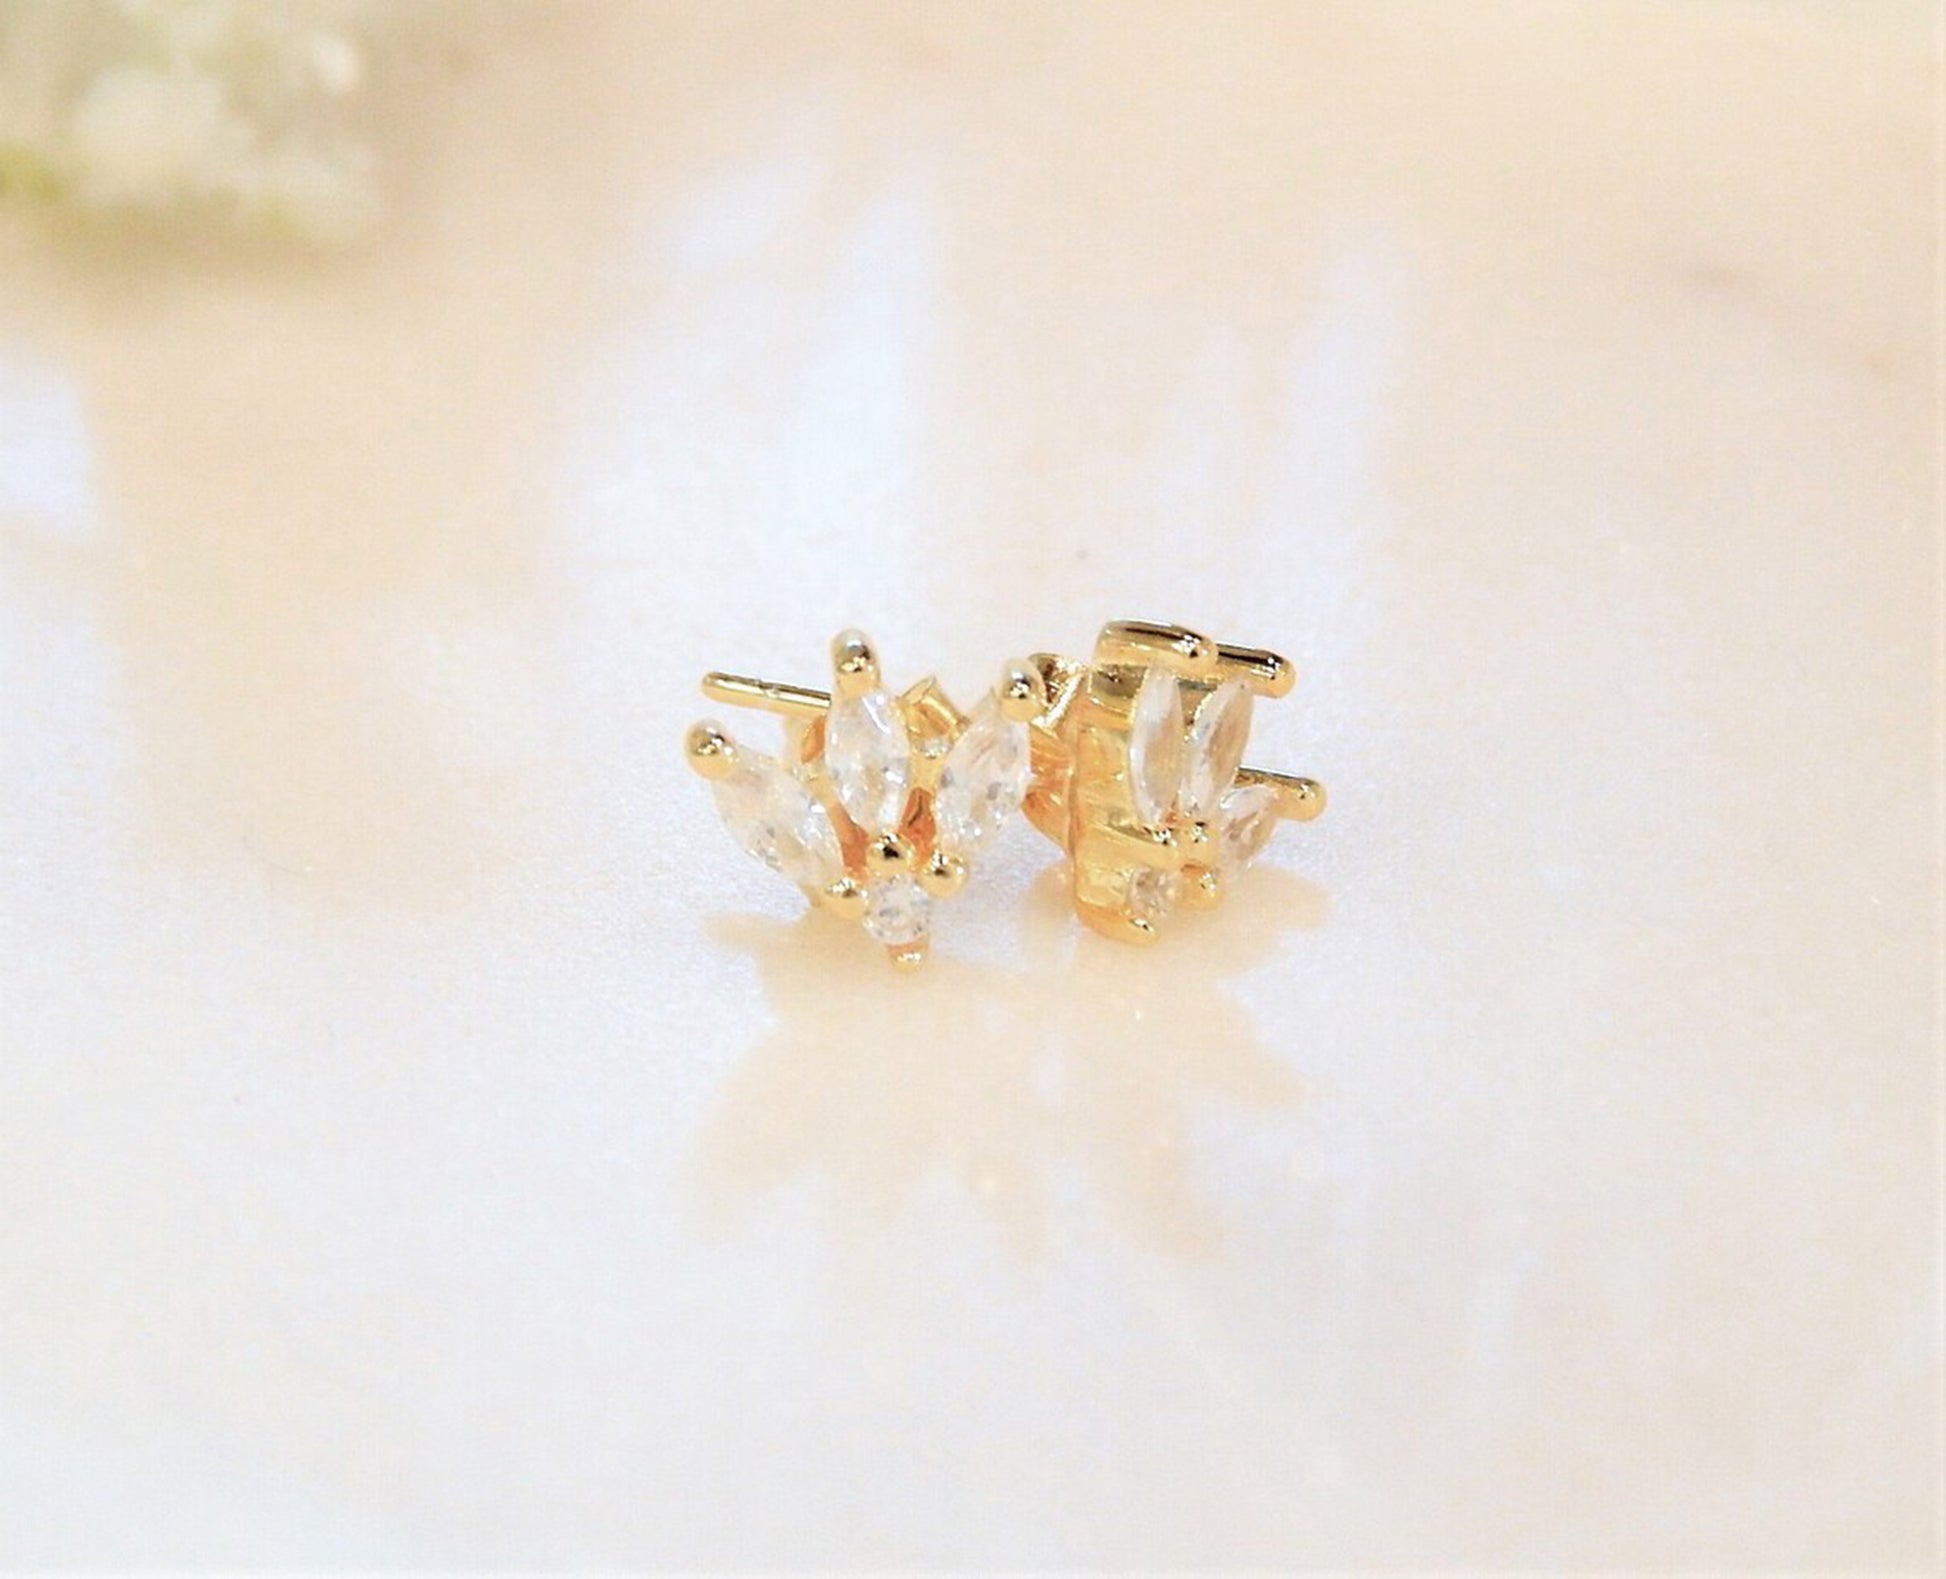 Pair of gold earrings with 4 diamond cubic zirconias are placed on a light and slightly reflective surface.